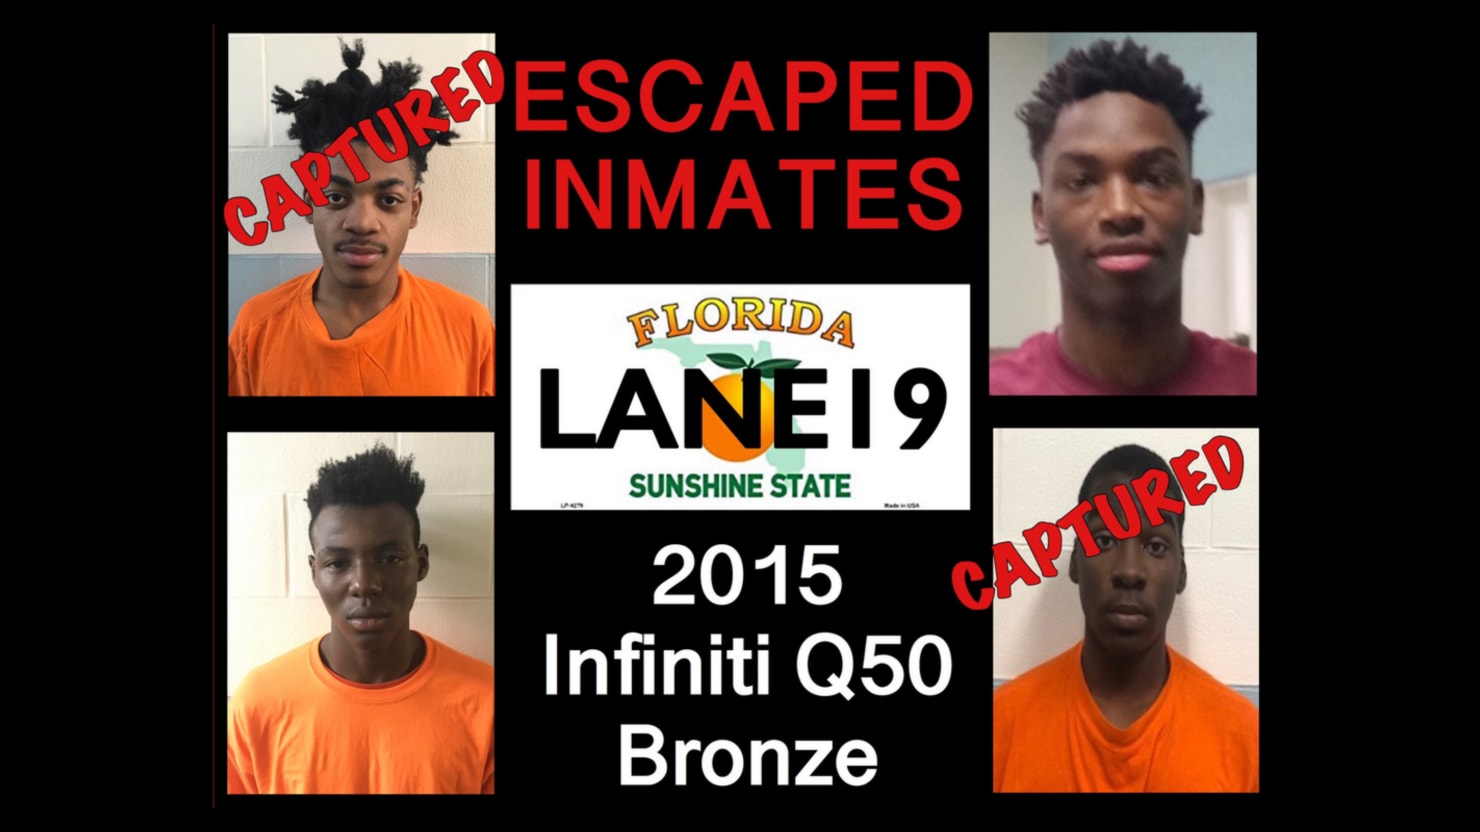 Four Inmates Faked a Fight to Escape Florida Juvenile Detention Center